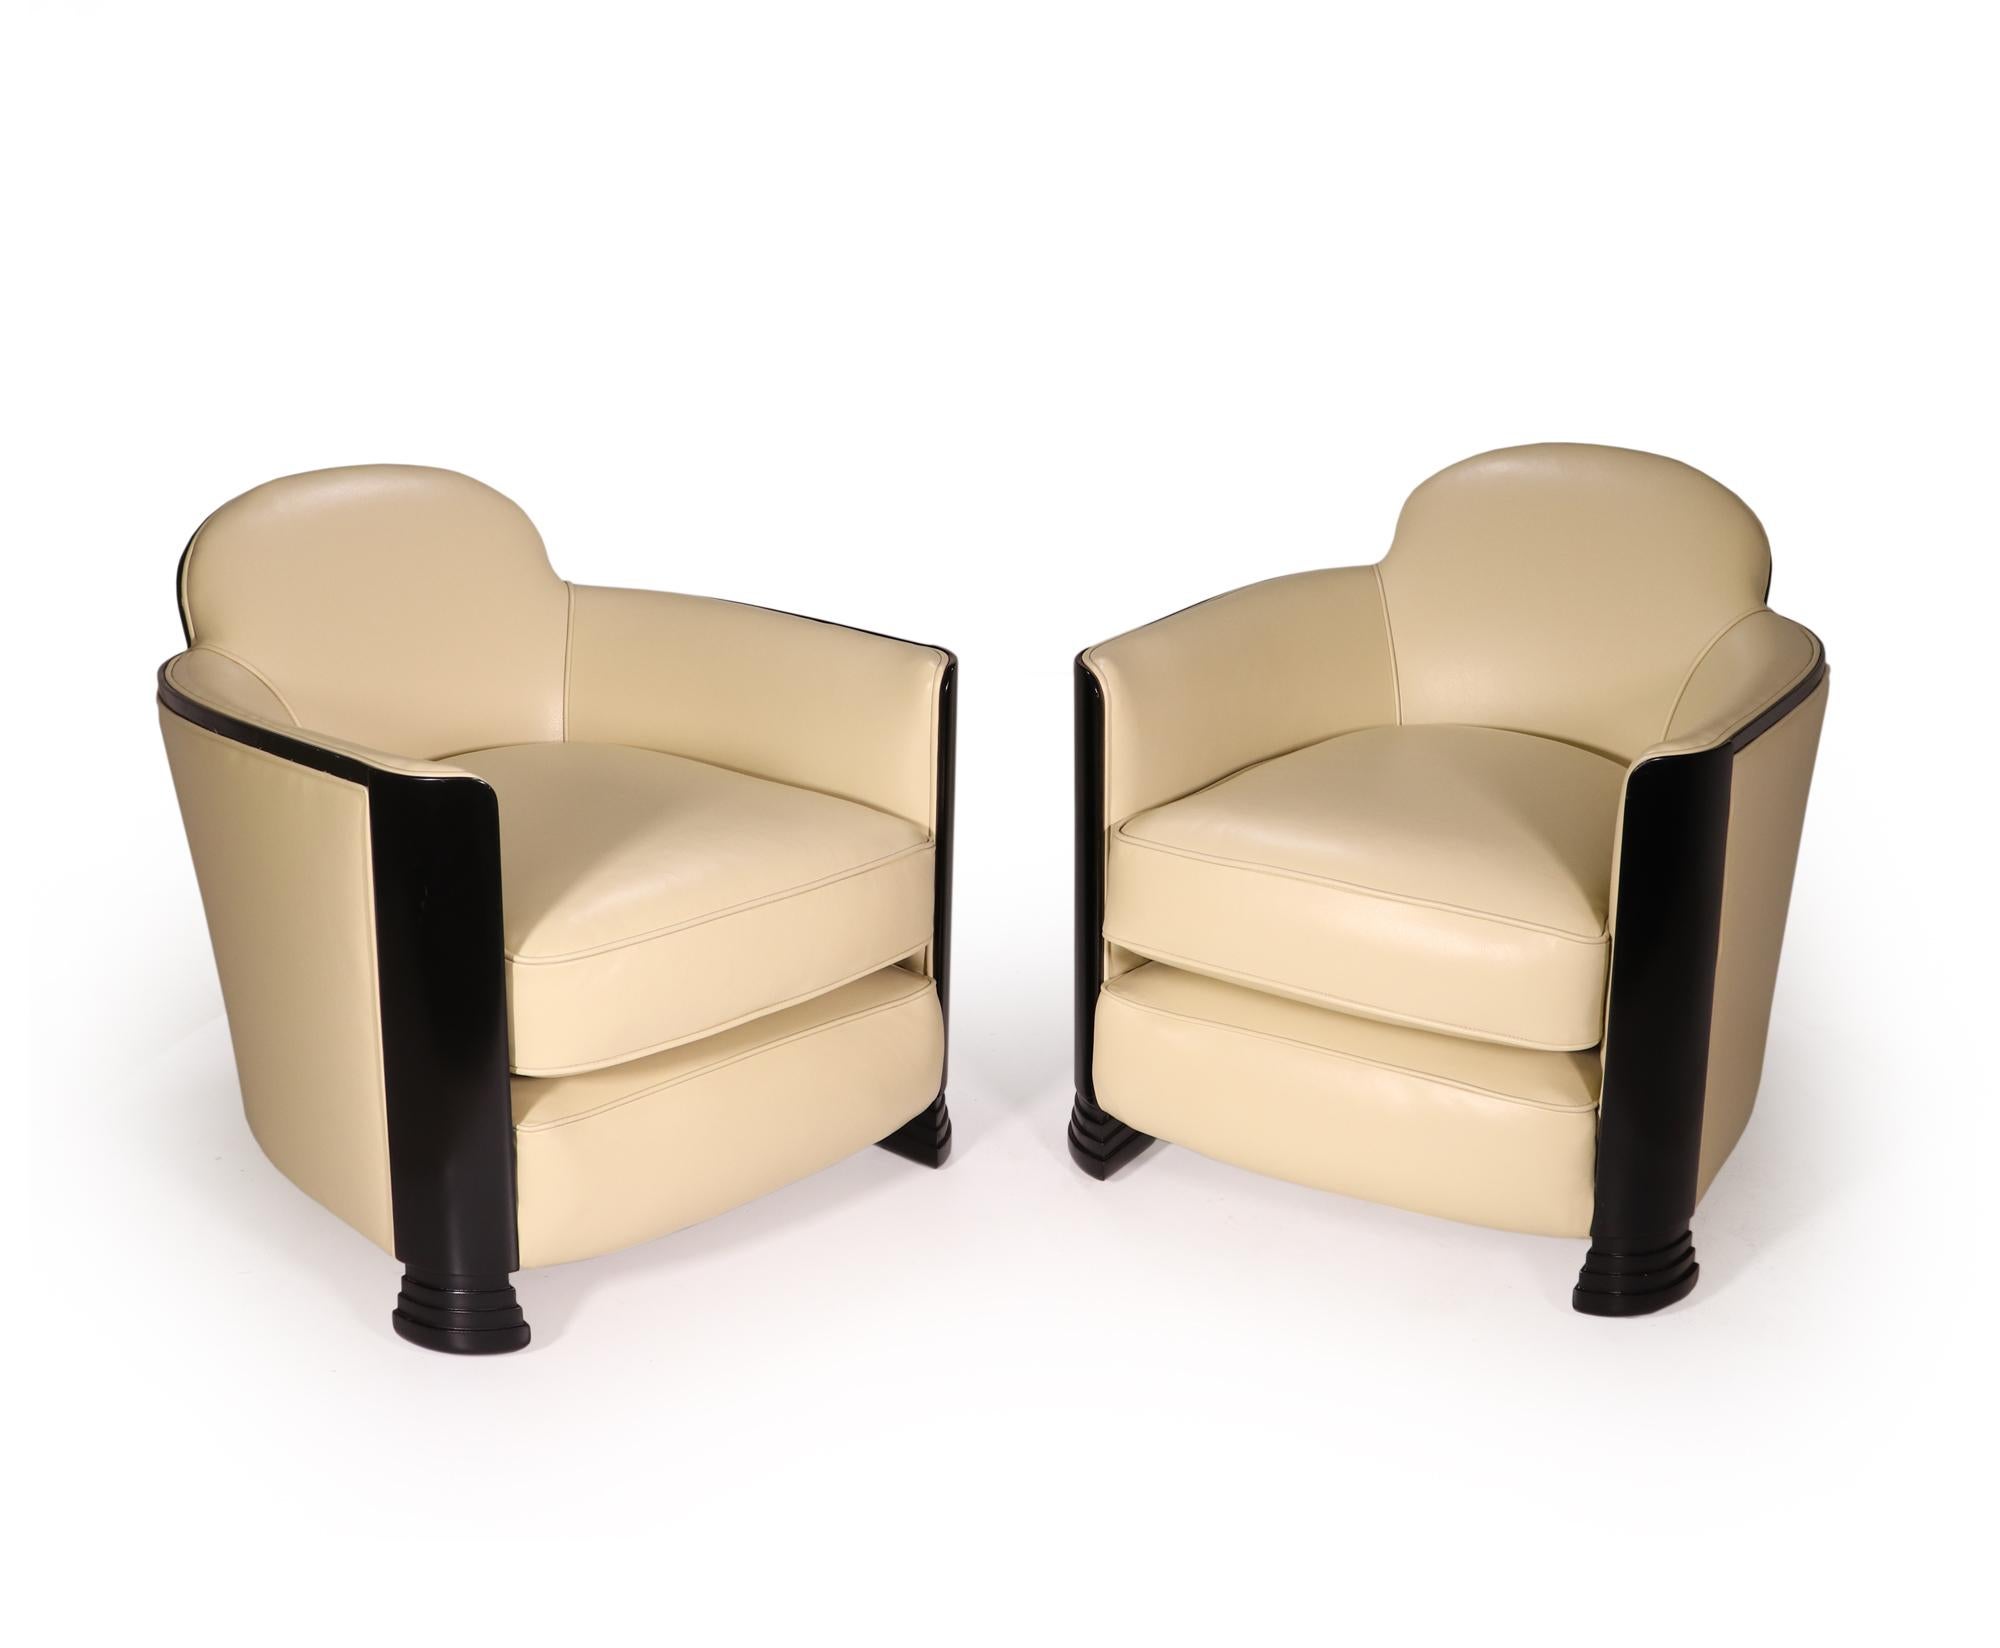 French Pair of Art Deco Arm Chairs, c1930